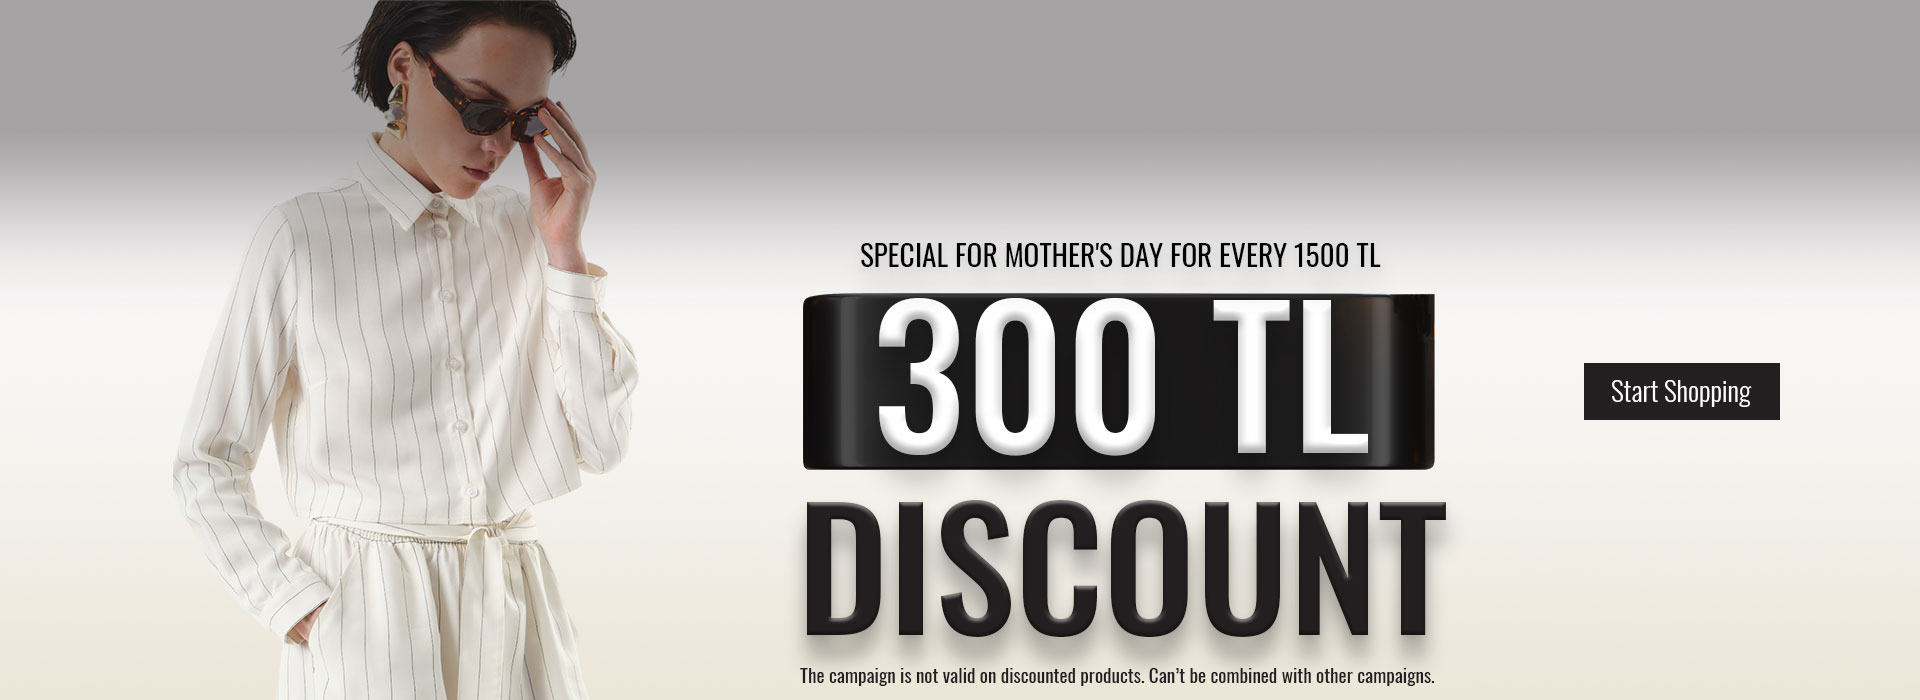 special-for-mothers-day-300tl-discount